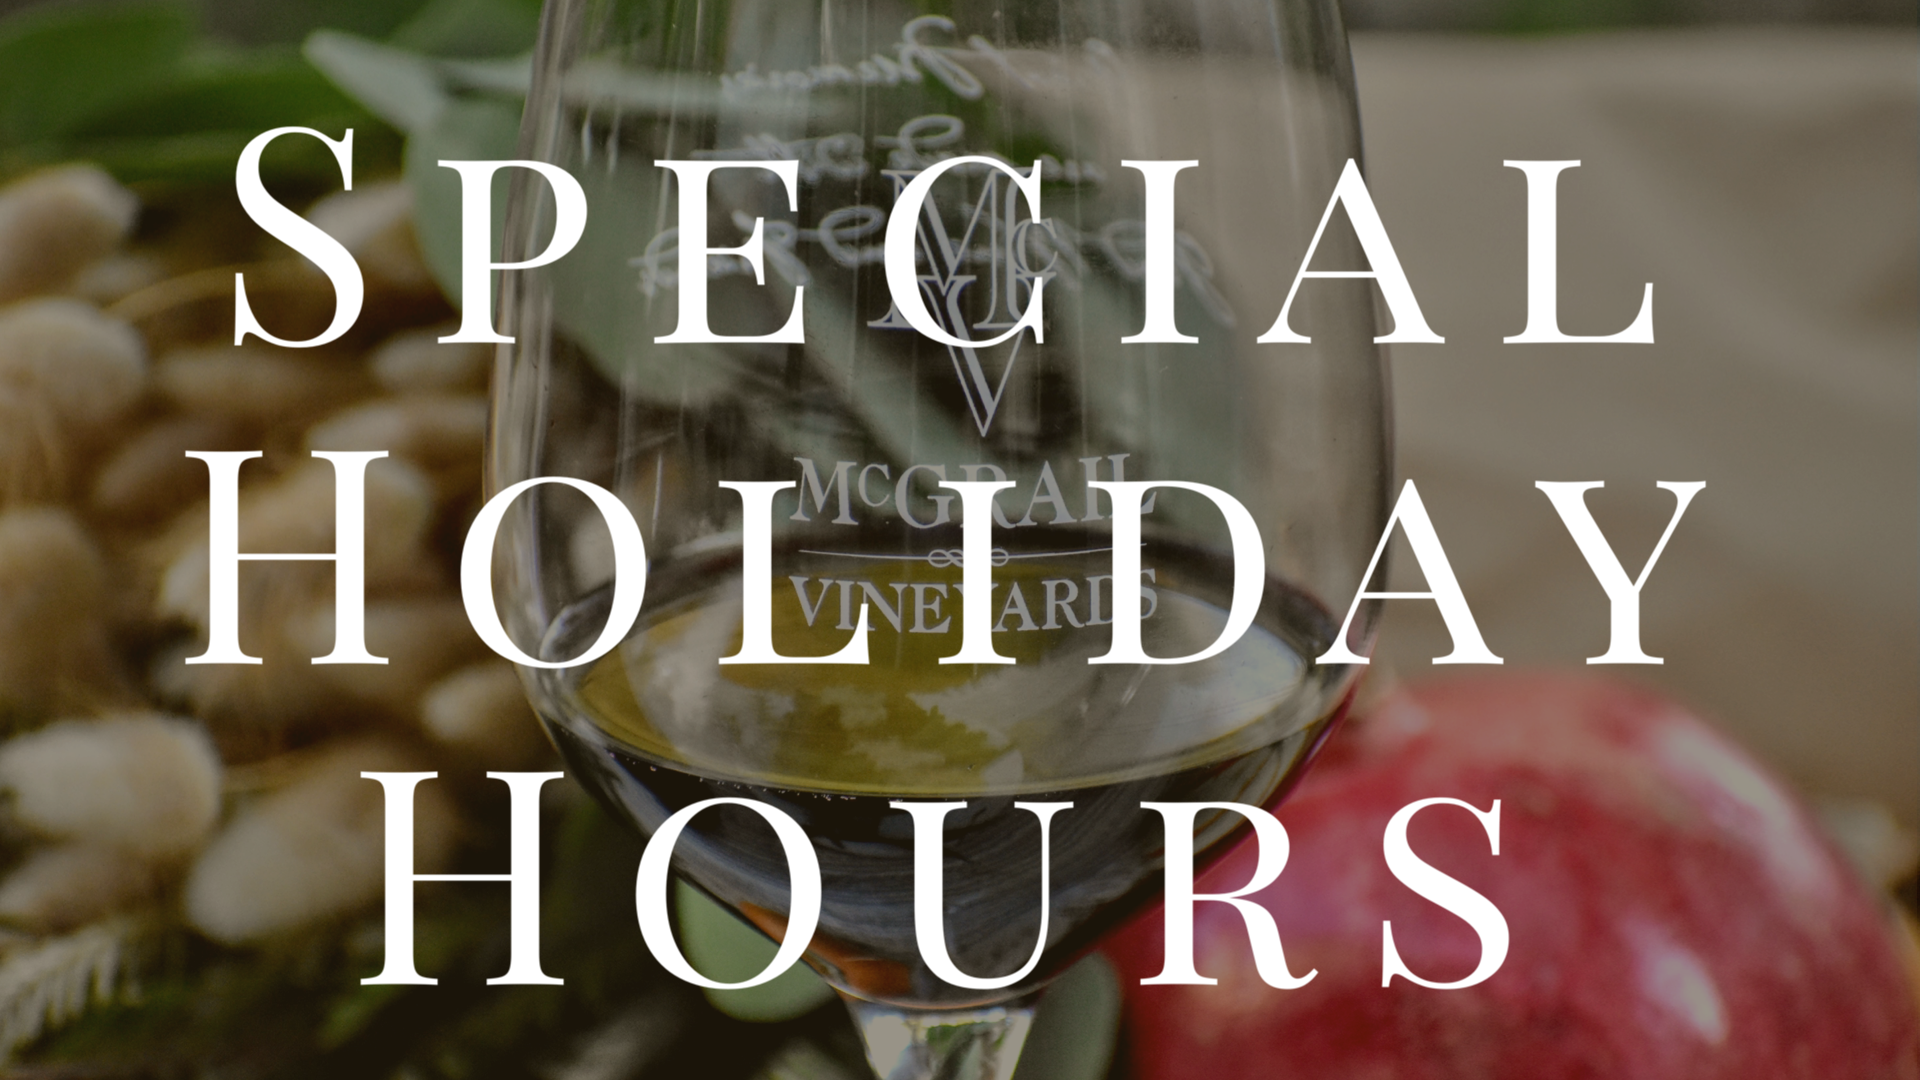 SPECIAL HOLIDAY HOURS: Reservations Available Nov. 23rd-25th